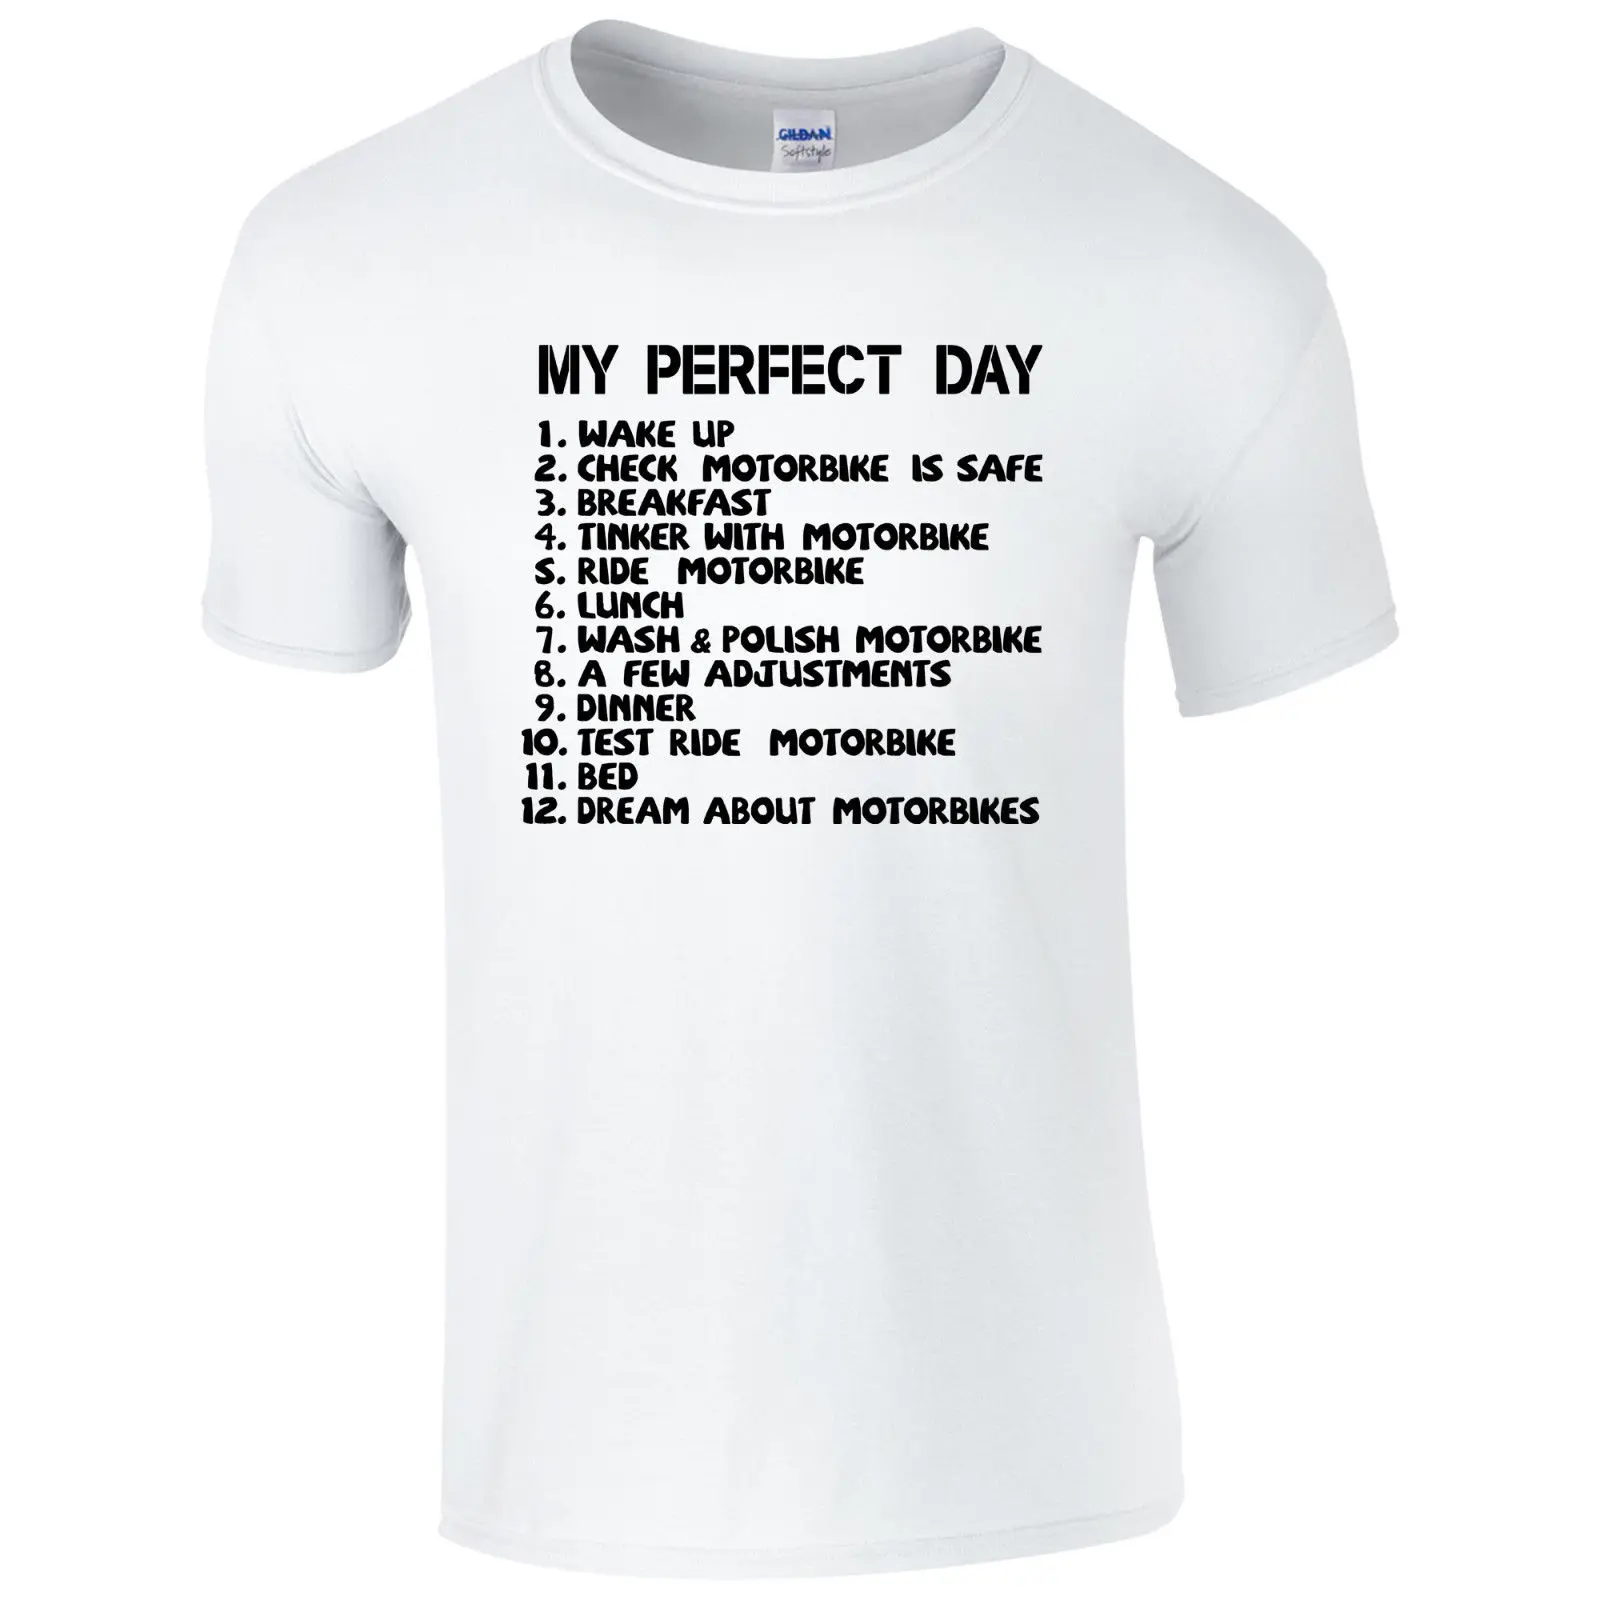 

My Perfect Day Motorbike T-Shirt Biker Dad Motorcycle To Do List Mens Gift Top Cotton short sleeve t shirt camisa masculina